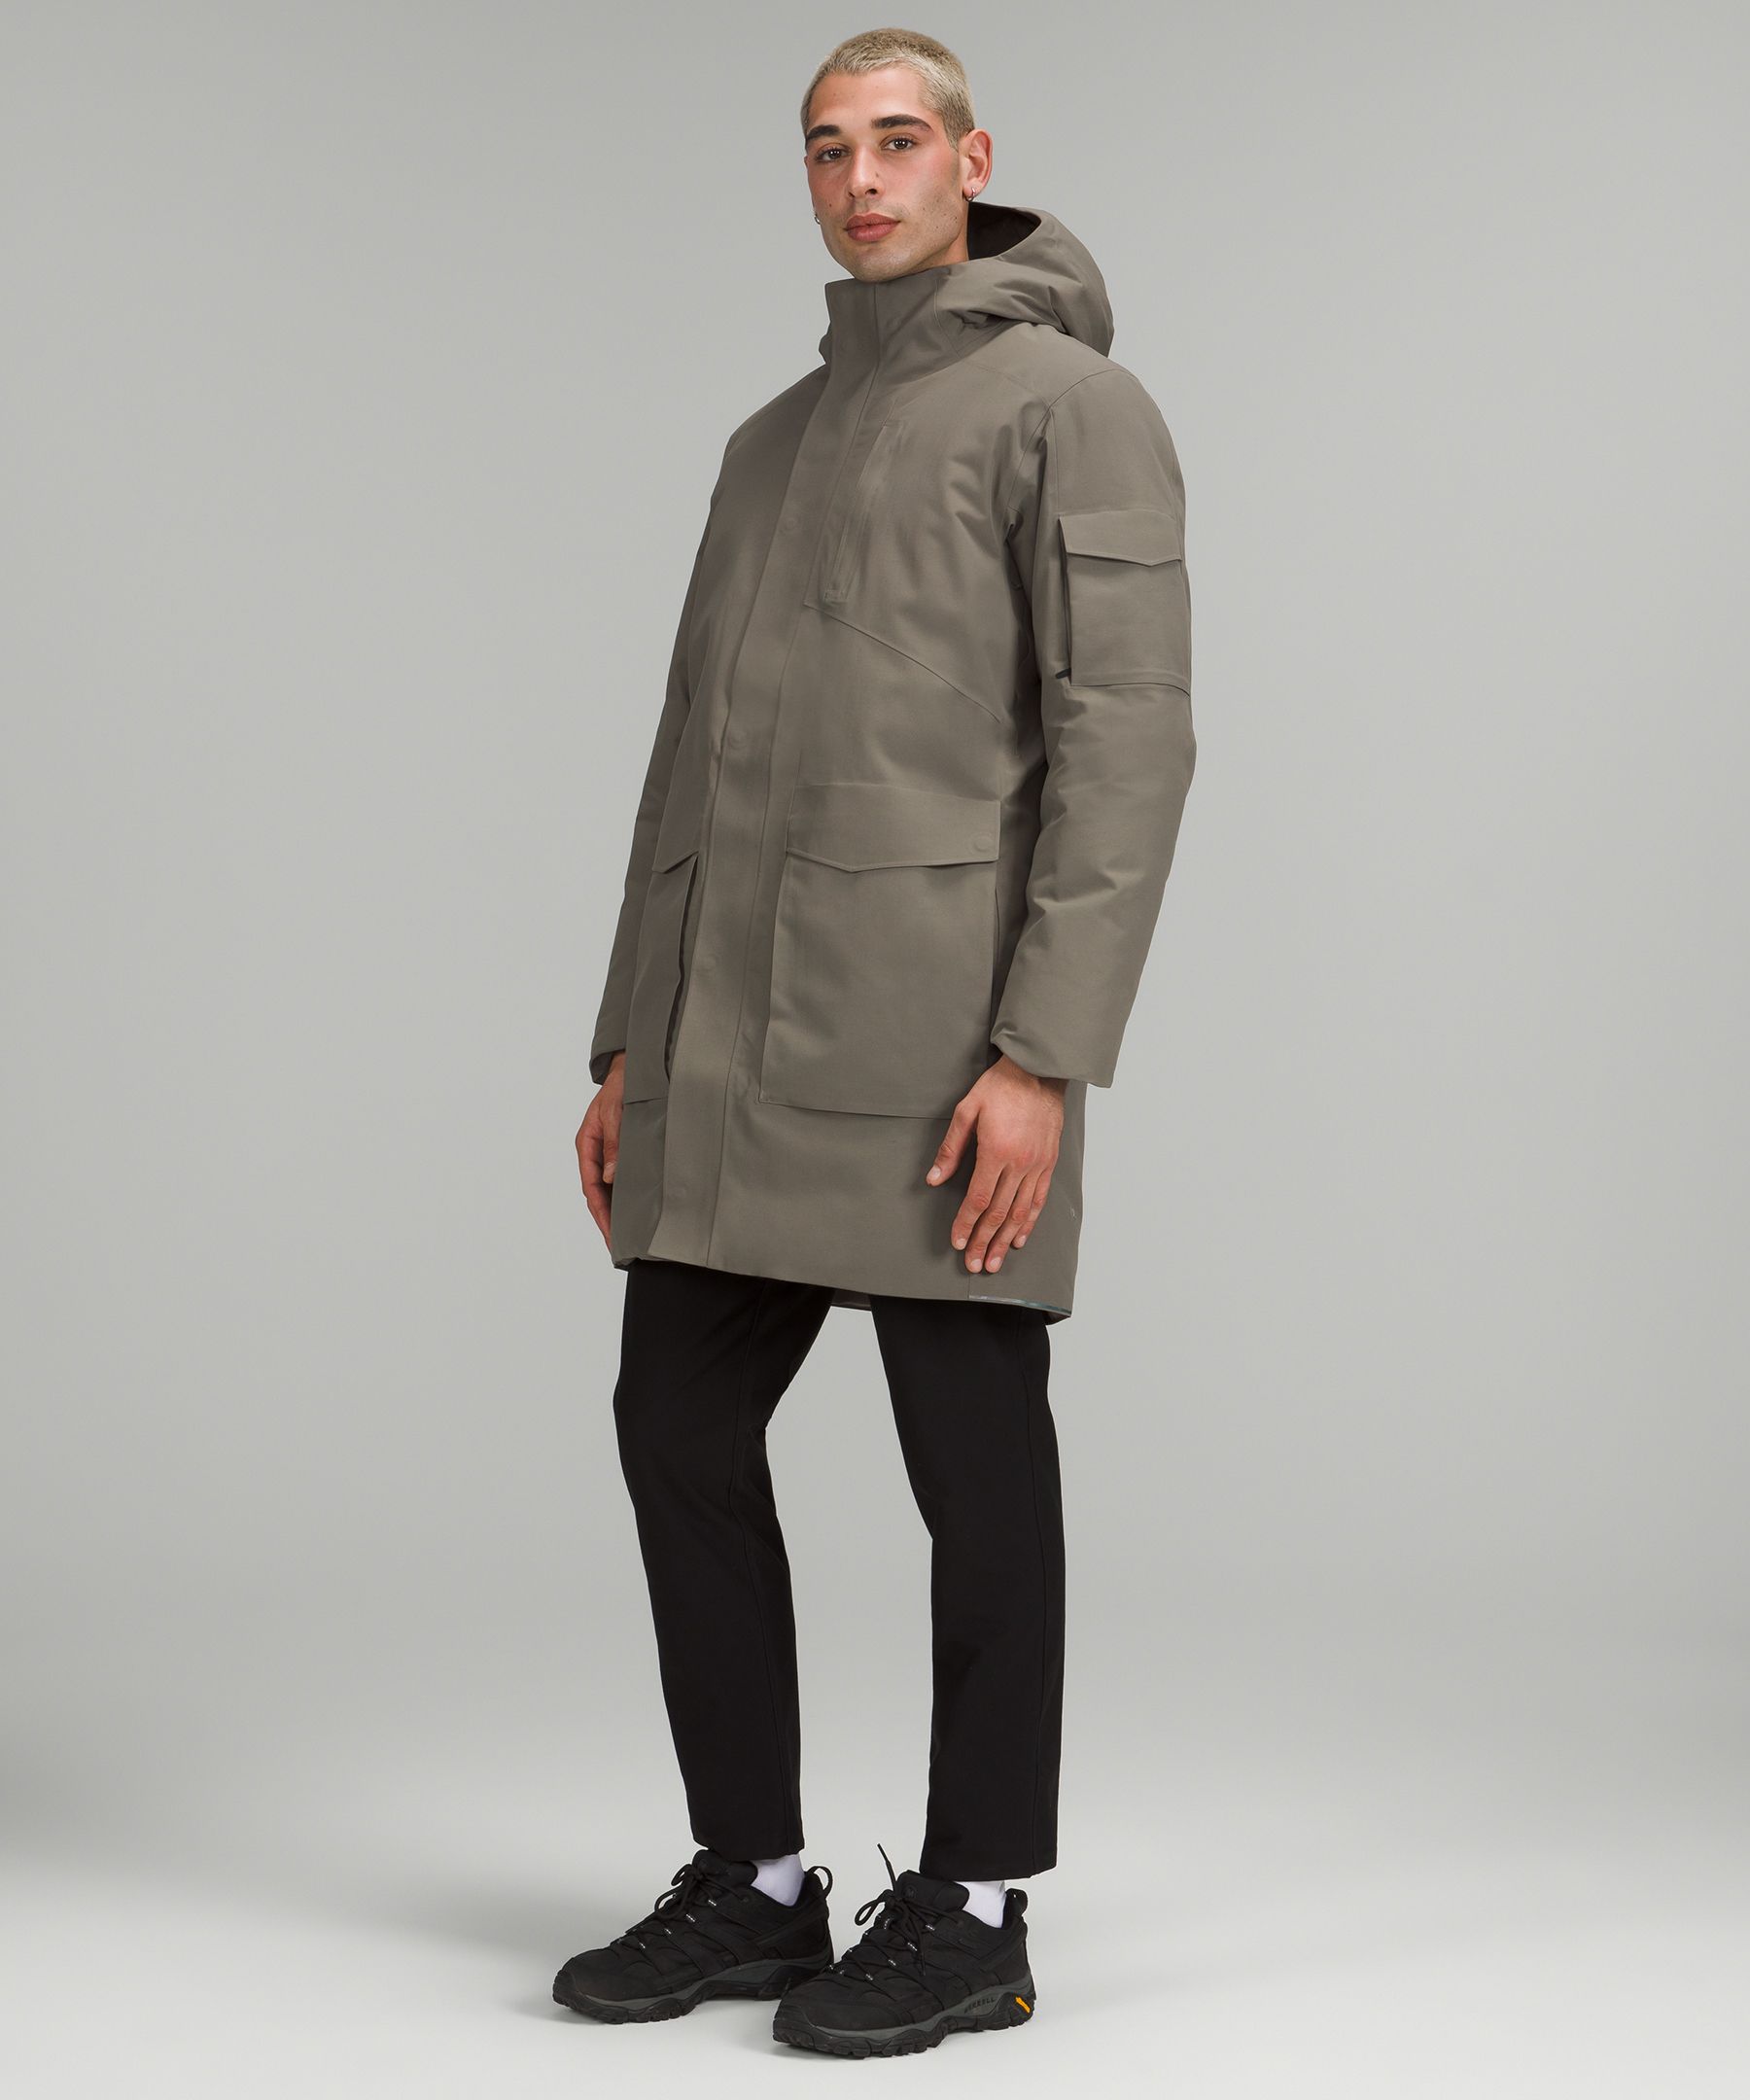 5 Best lululemon Parkas to Keep You Warm This Winter